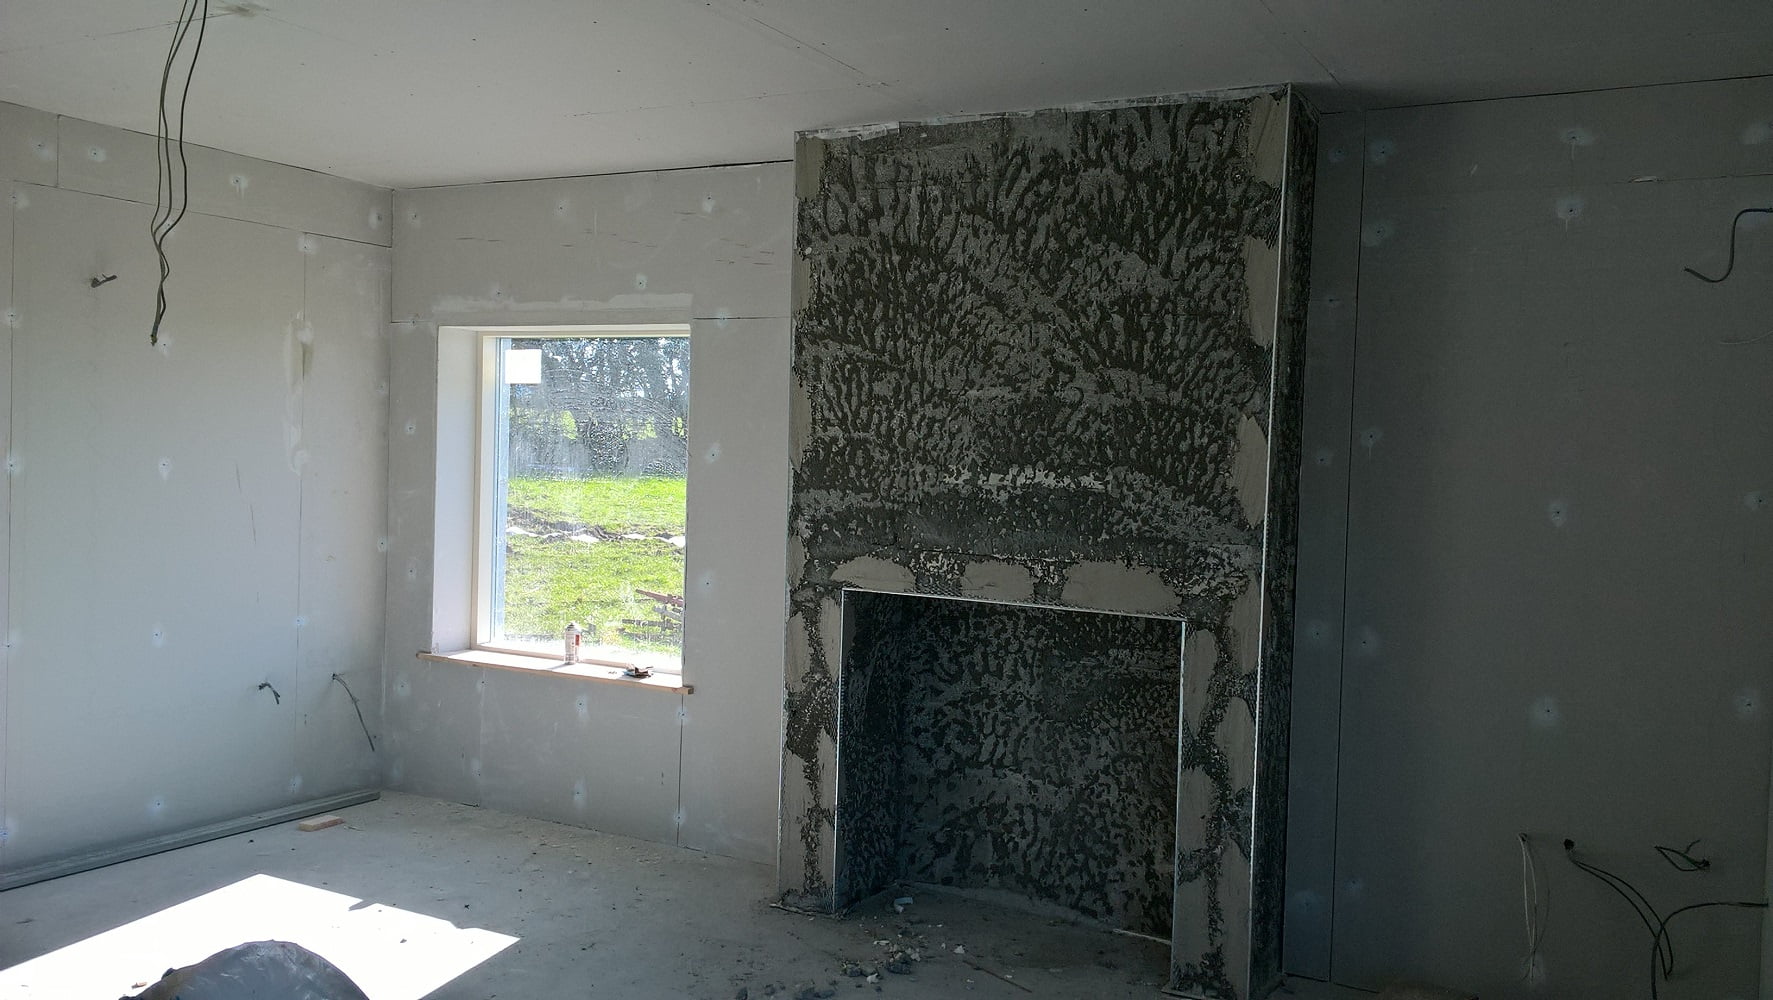 Preparing a Fireplace and Room for Plastering